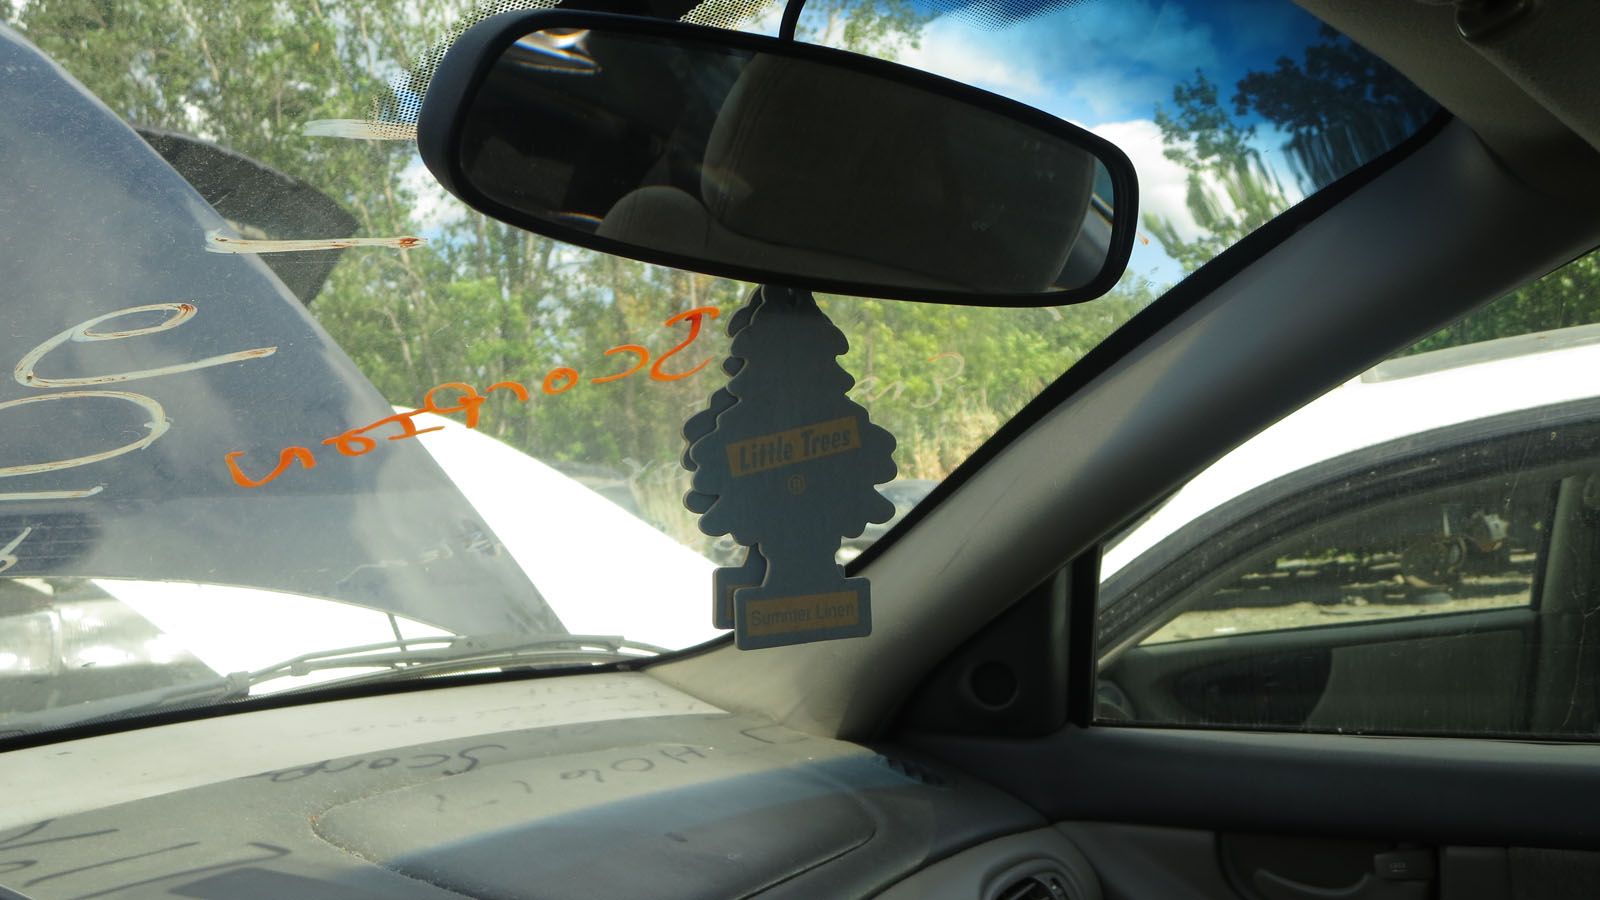 BRAKING NEWS: Air Freshener Overload Leads To Car Explosion, 56% OFF